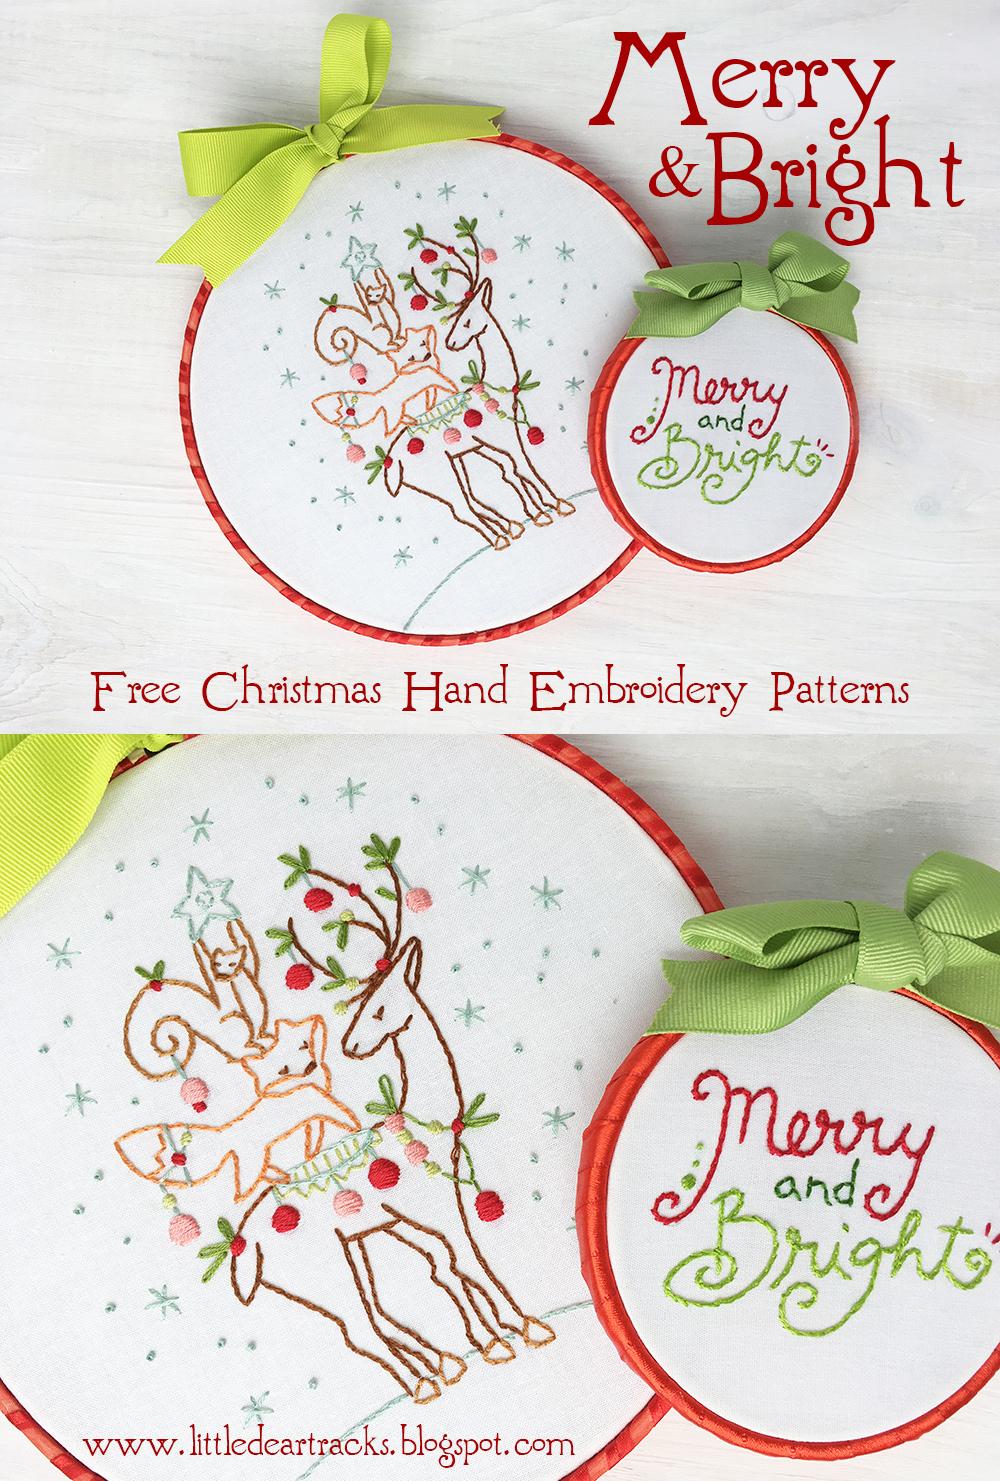 Free Embroidery Patterns Little Dear Tracks Free Christmas Embroidery Patterns